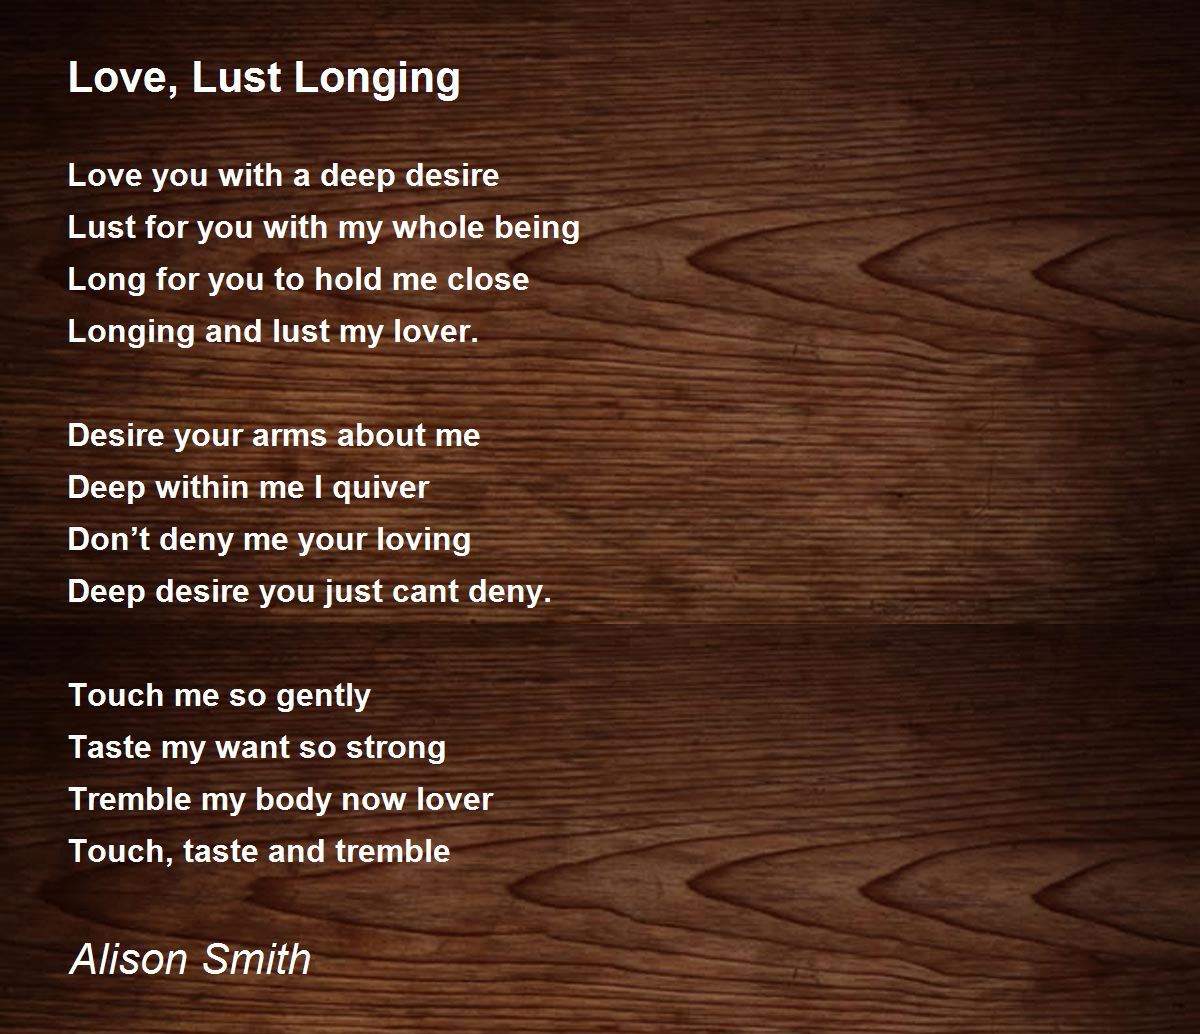 Love Lust Longing Poem By Alison Smith Poem Hunter Comments Page 1